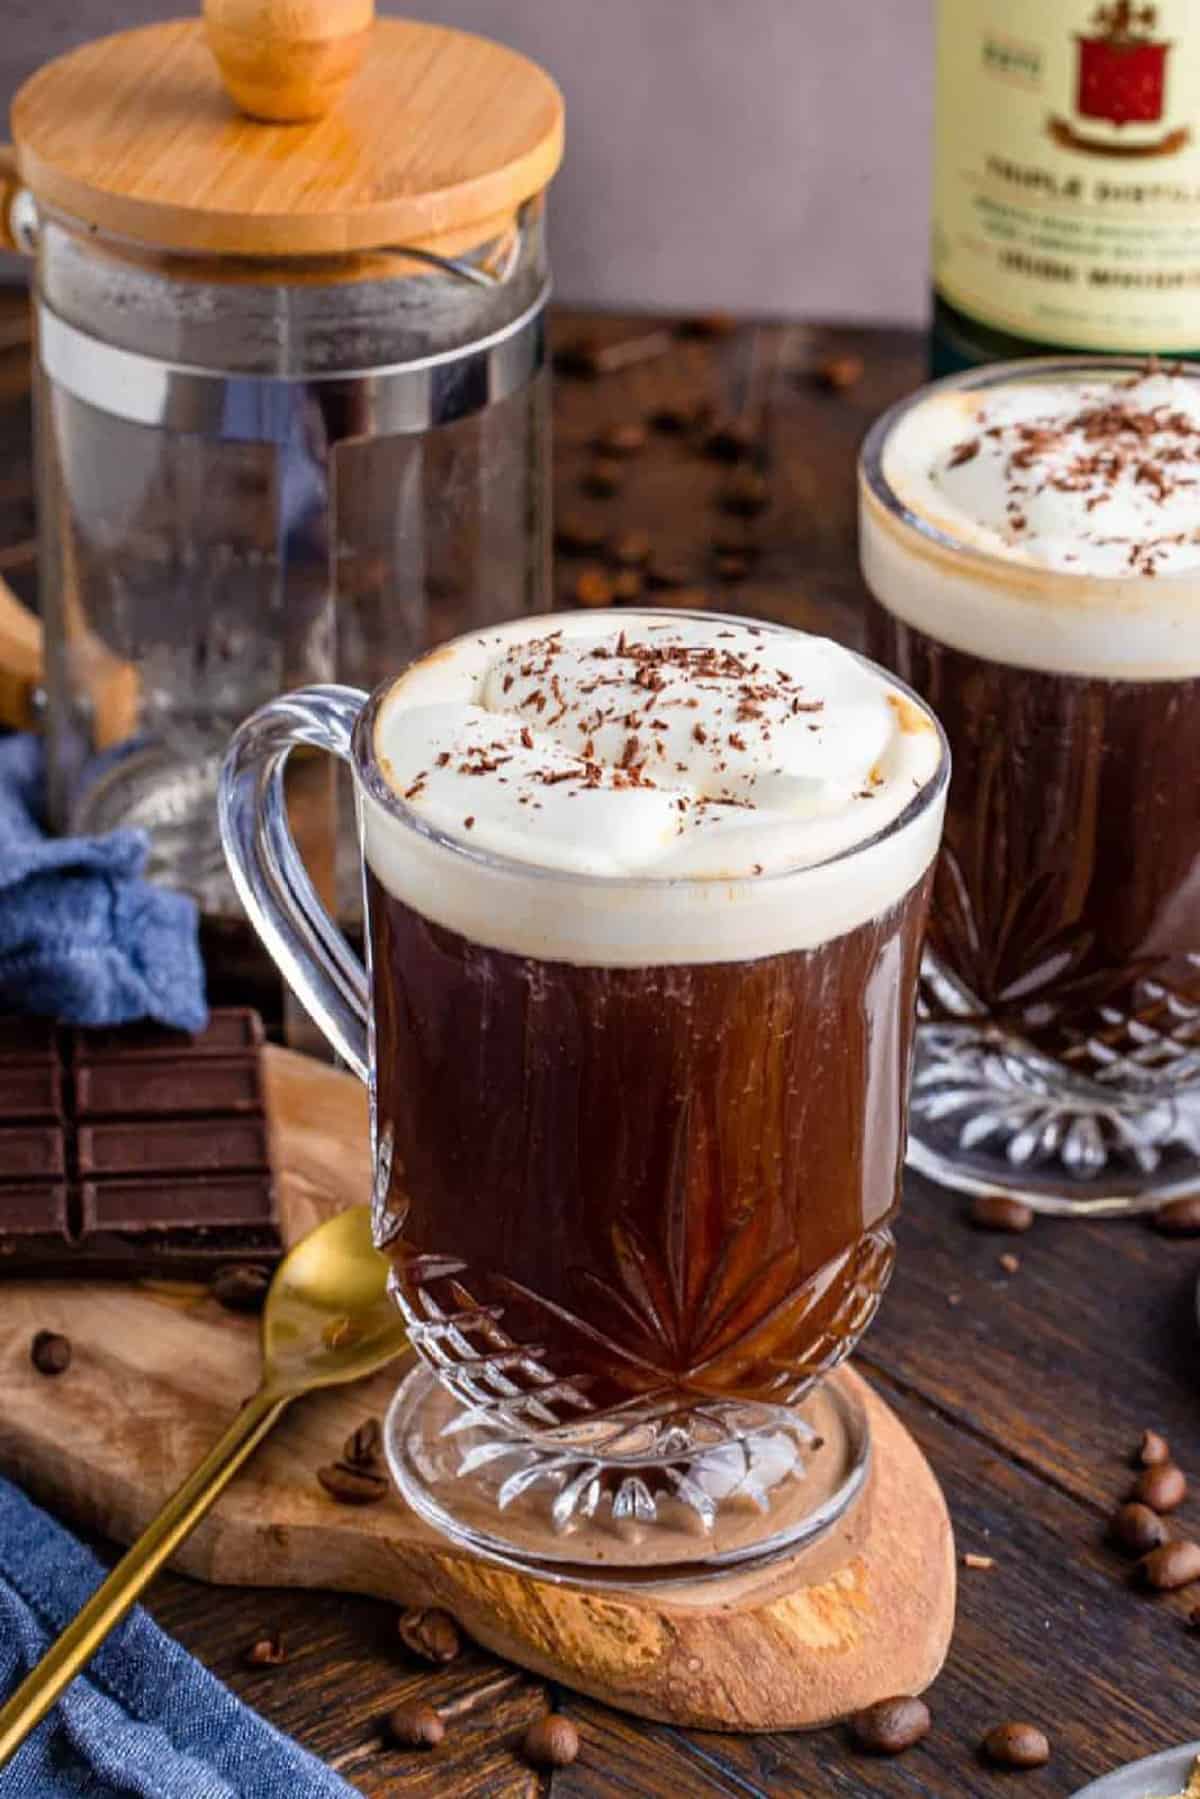 Irish Coffee Recipe on wooden board with long golden spoon with french press in background and topped with whipped cream and chocolate shavings.